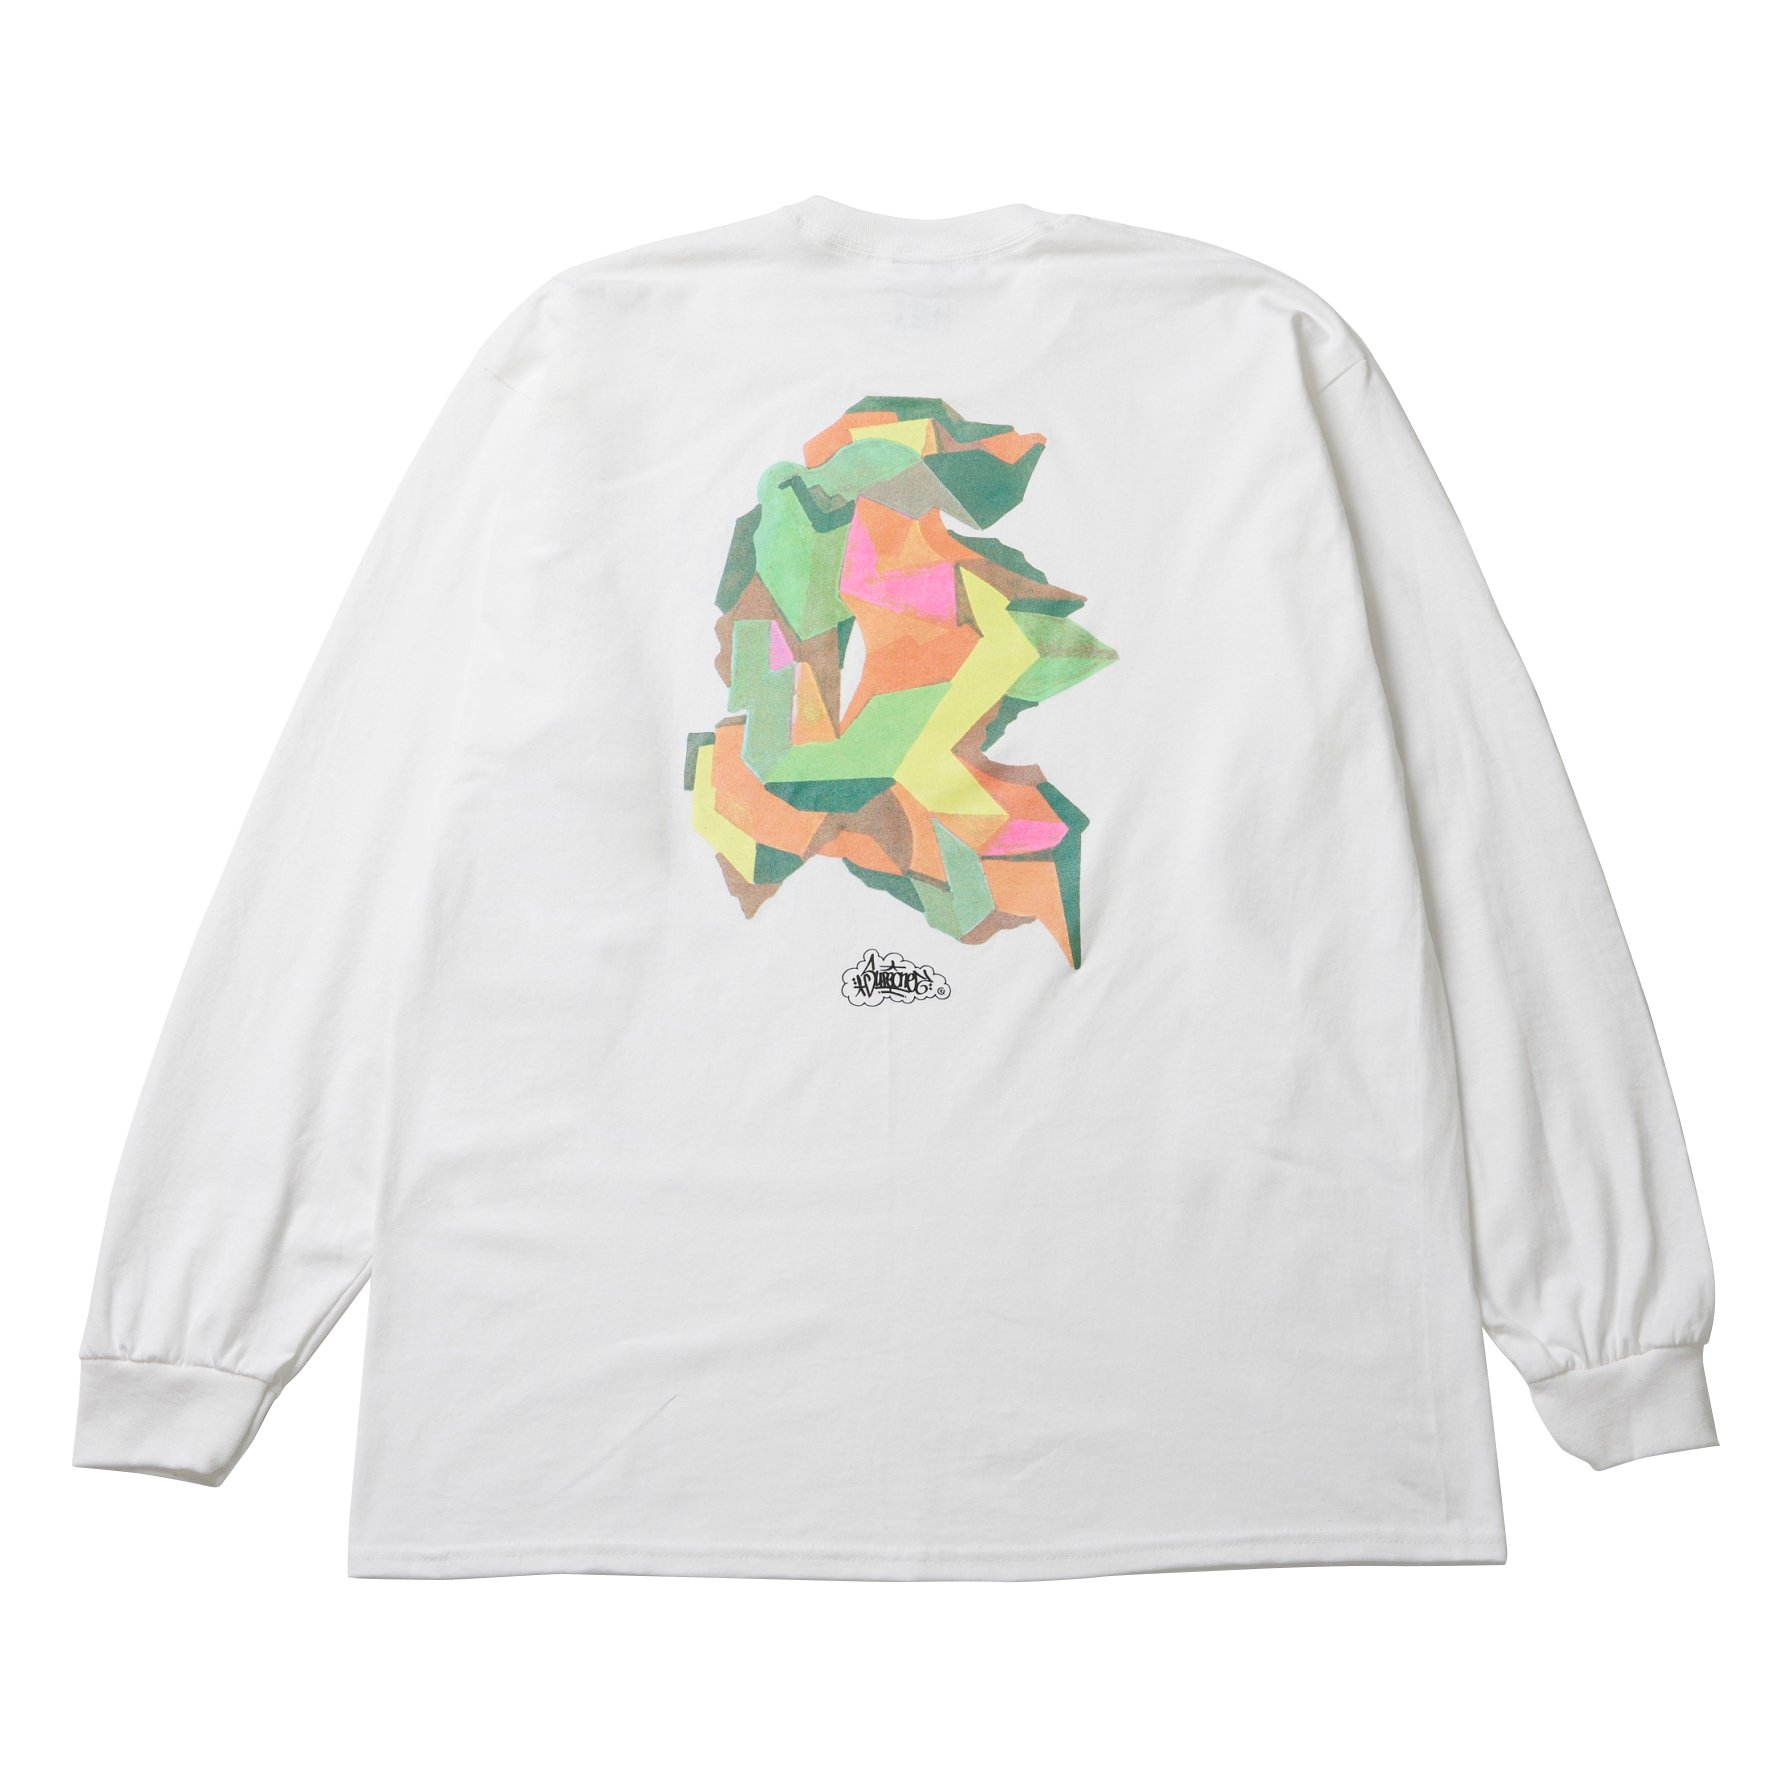 DMB<br>SUPE Long Sleeves Tee<br>